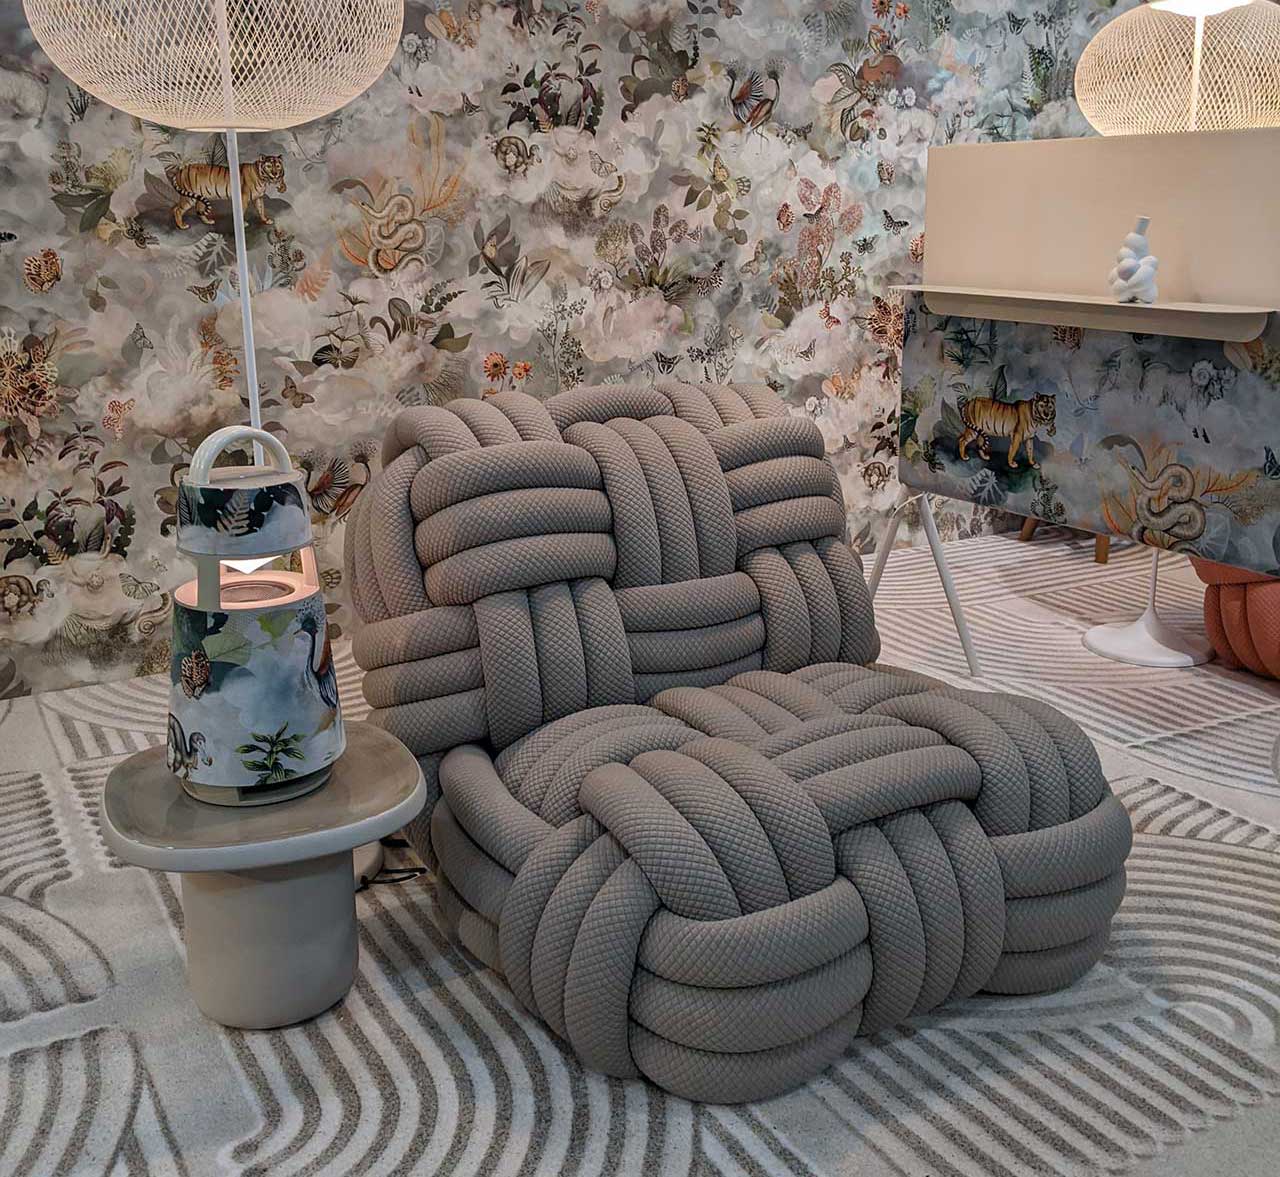 Best of ICFF + WantedDesign 2023: Handcraft, Reclamation, and Blobjects